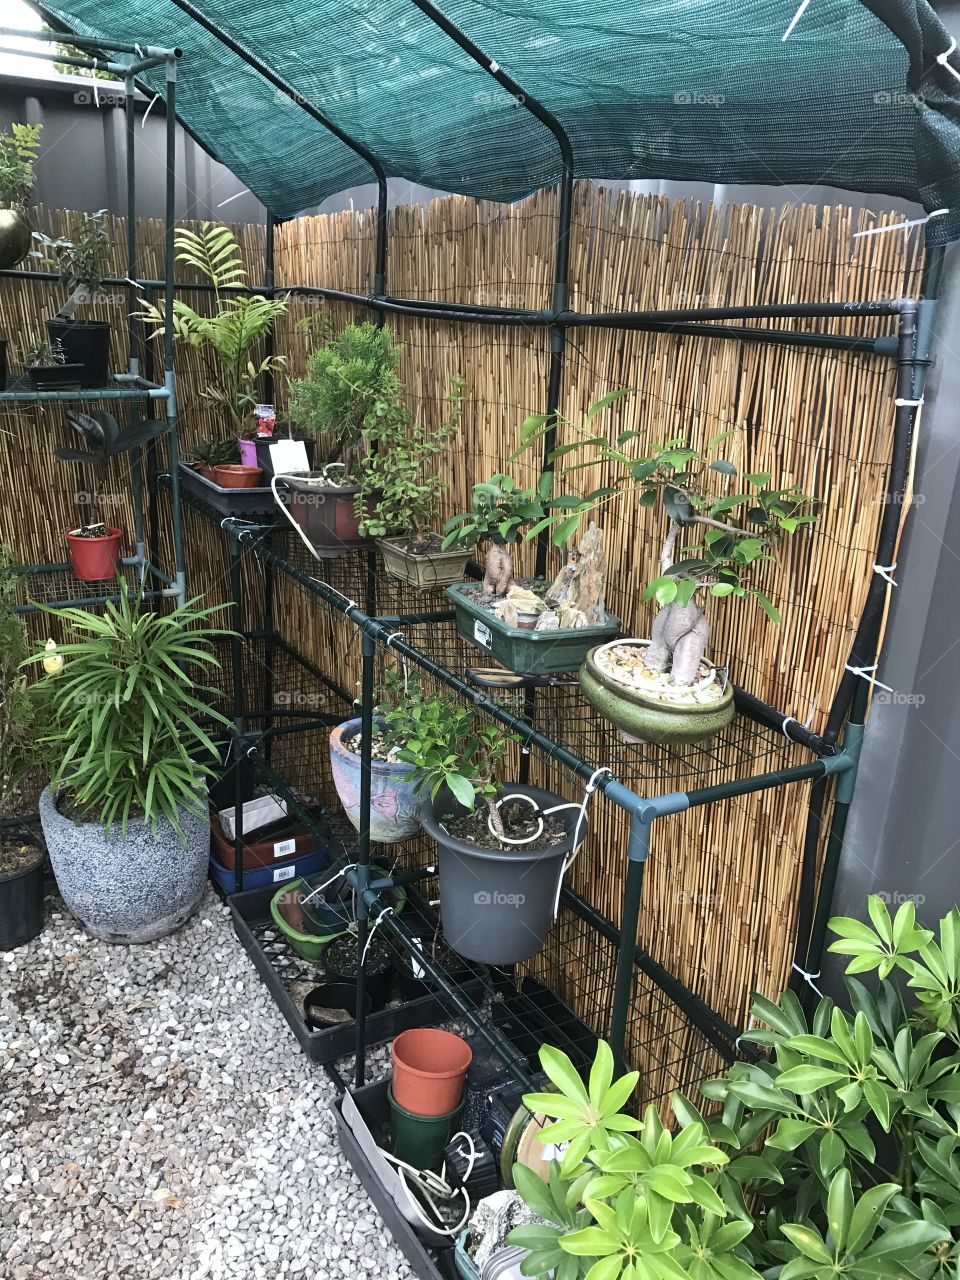 This is a photo of my greenhouse. It has a tropical feel and house my bonsai and some other plants. This photo was taken after Cyclone Debbie damaged my old greenhouse and I created a new one. I'm loving the Bali-feel of the bamboo screening. 